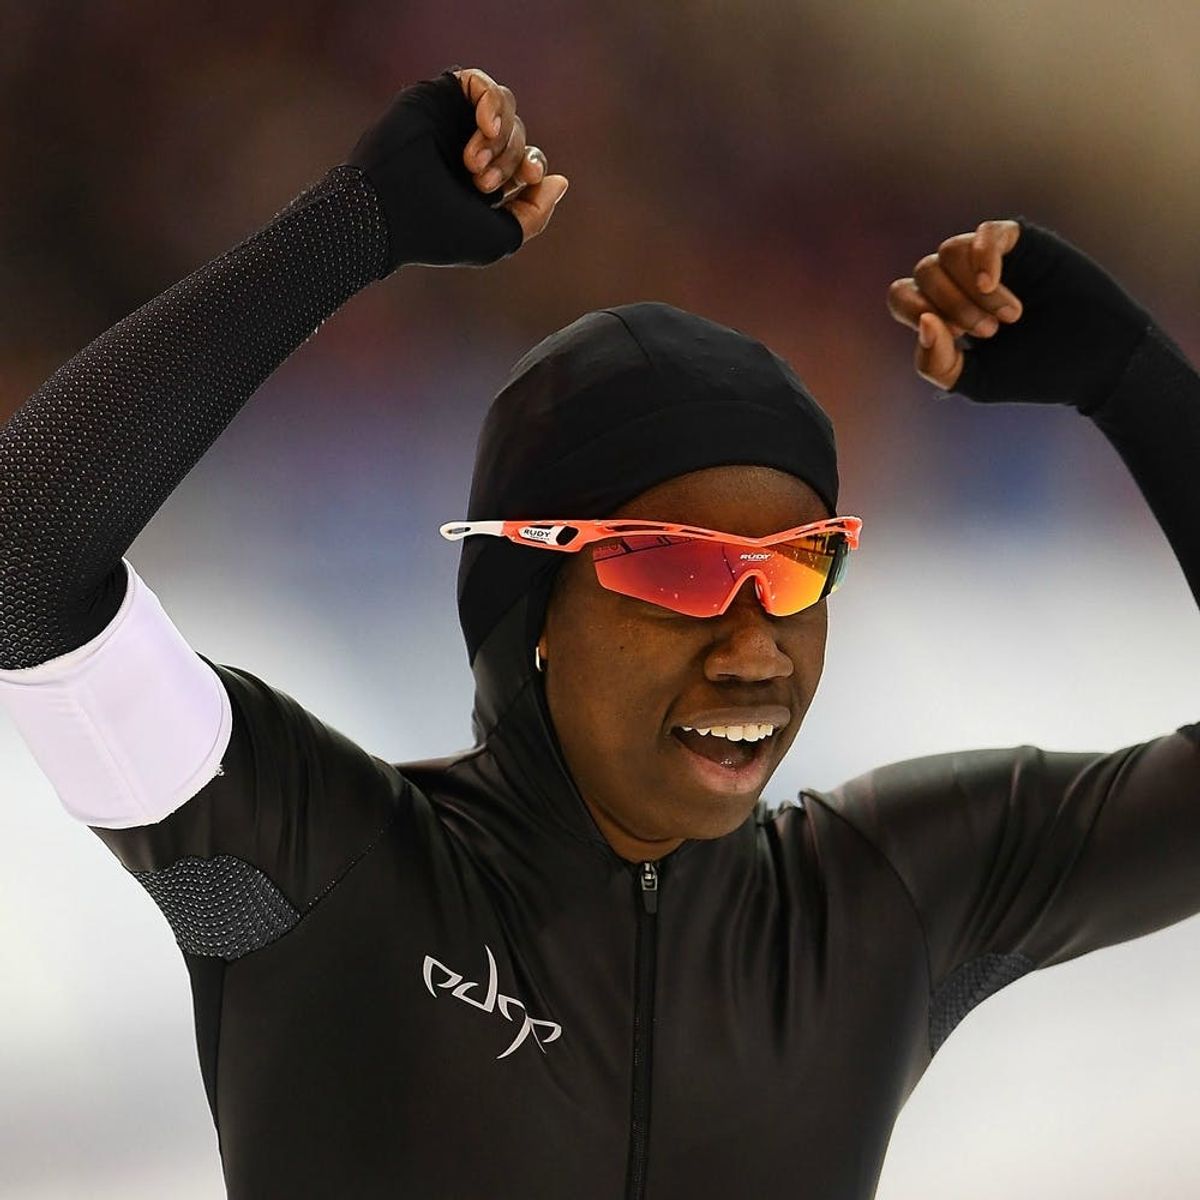 Erin Jackson Made the Olympic Speed Skating Team FOUR MONTHS After Learning the Sport